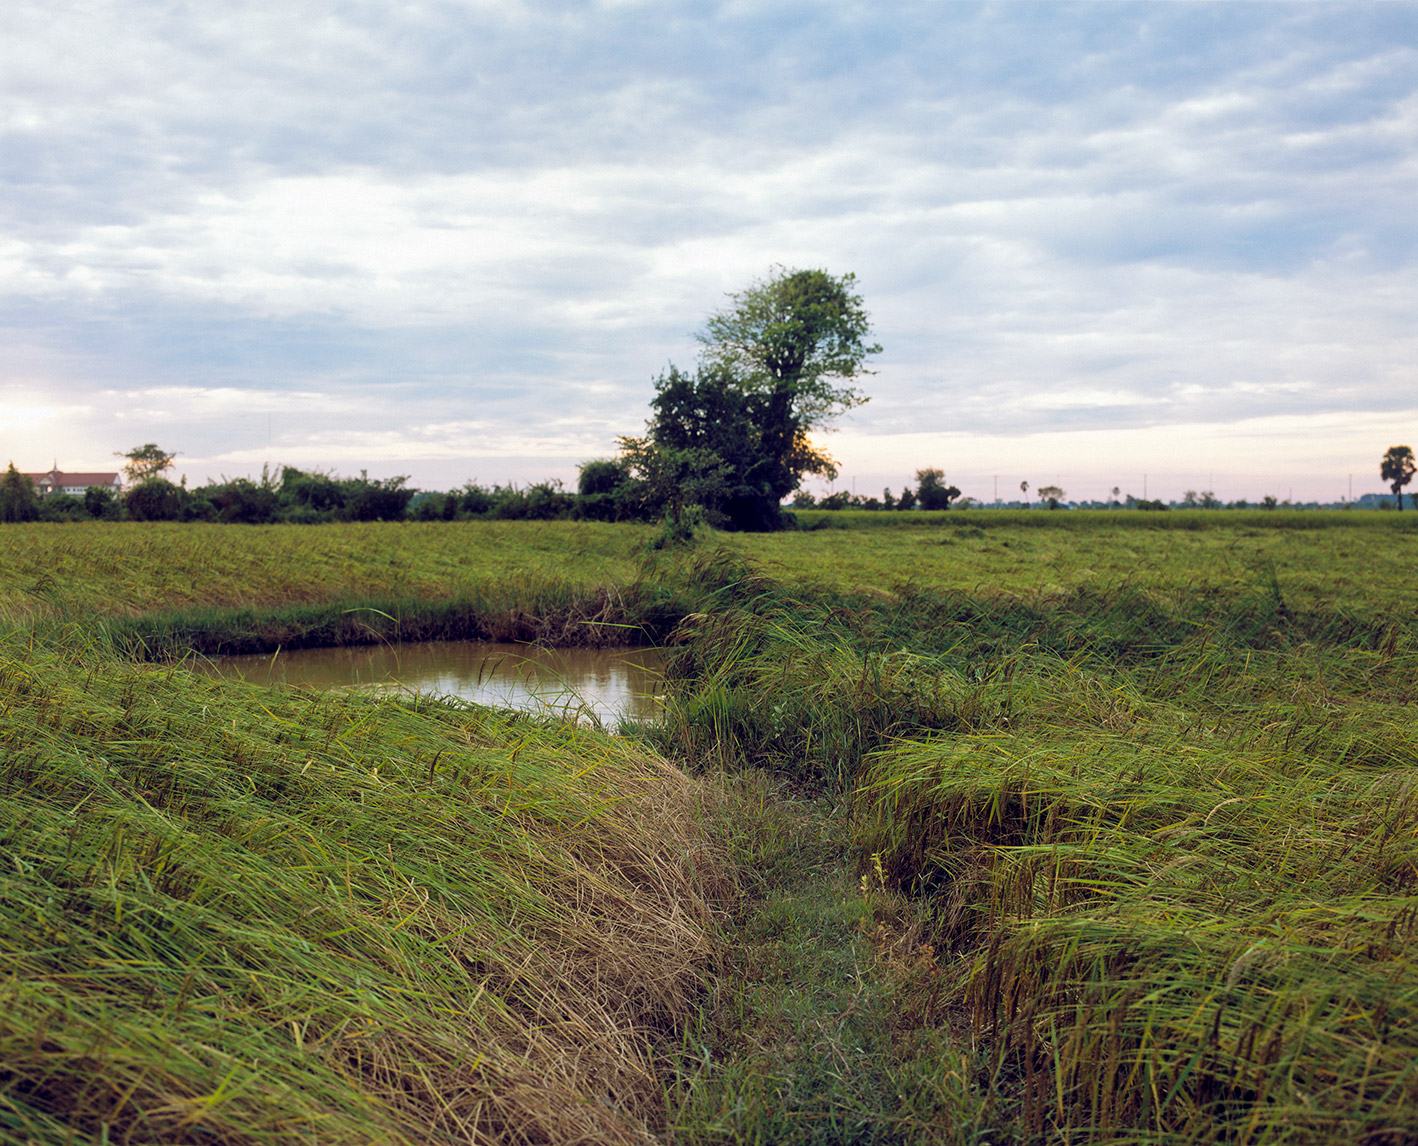 Ditch leading to a landmine crater pond